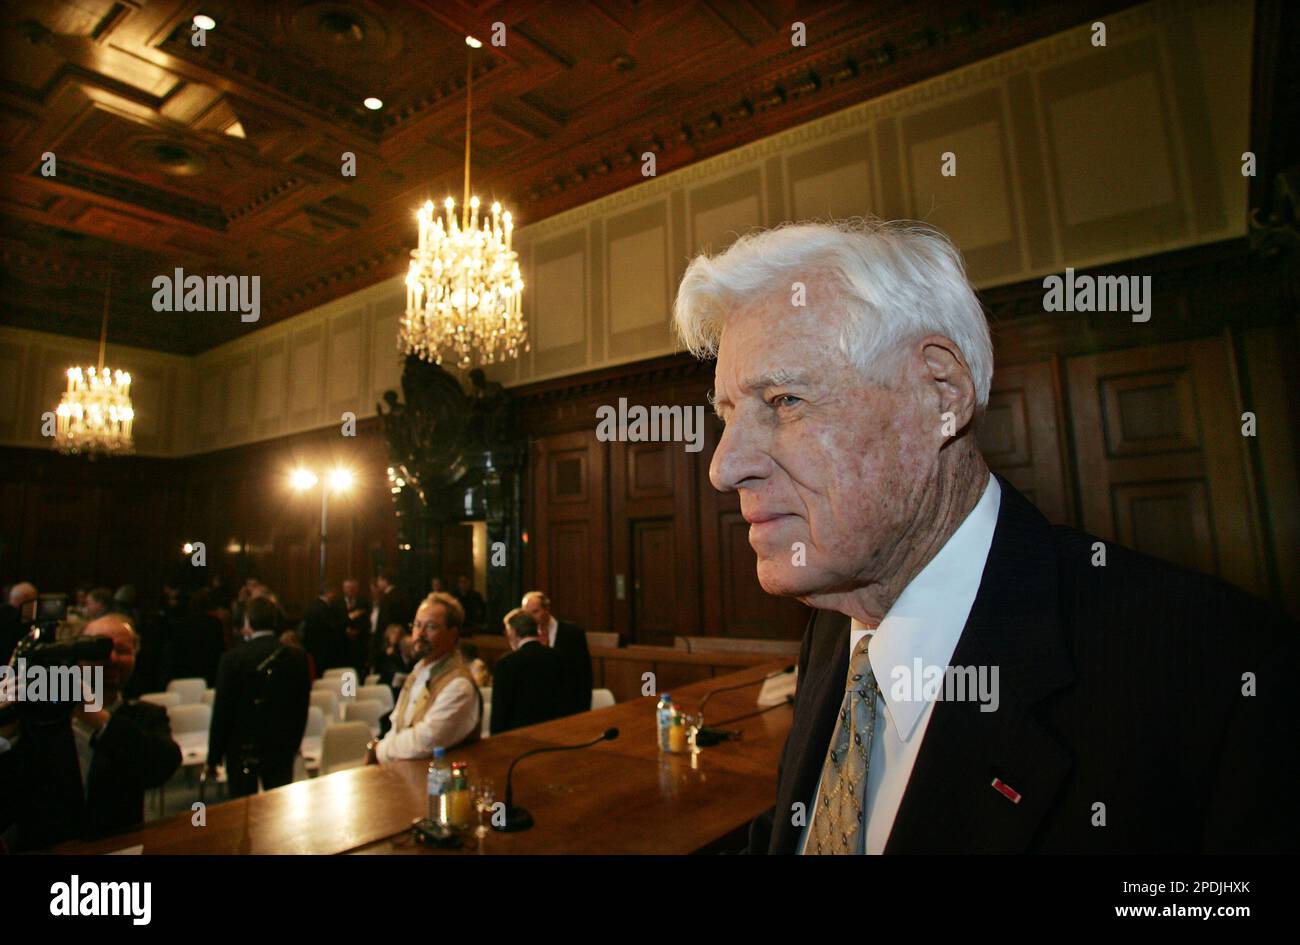 Whitney Harris, former U.S. prosecutor during the Nazi trials, looks around in the historic courtroom in Nuremberg, southern Germany, Sunday, Nov. 20, 2005. A commemoration with witnesses of the time was held on the day of the 60th anniversary of the trial, that sent many Nazi leaders and generals to prison or to the gallows. (AP Photo/Diether Endlicher) Stock Photo